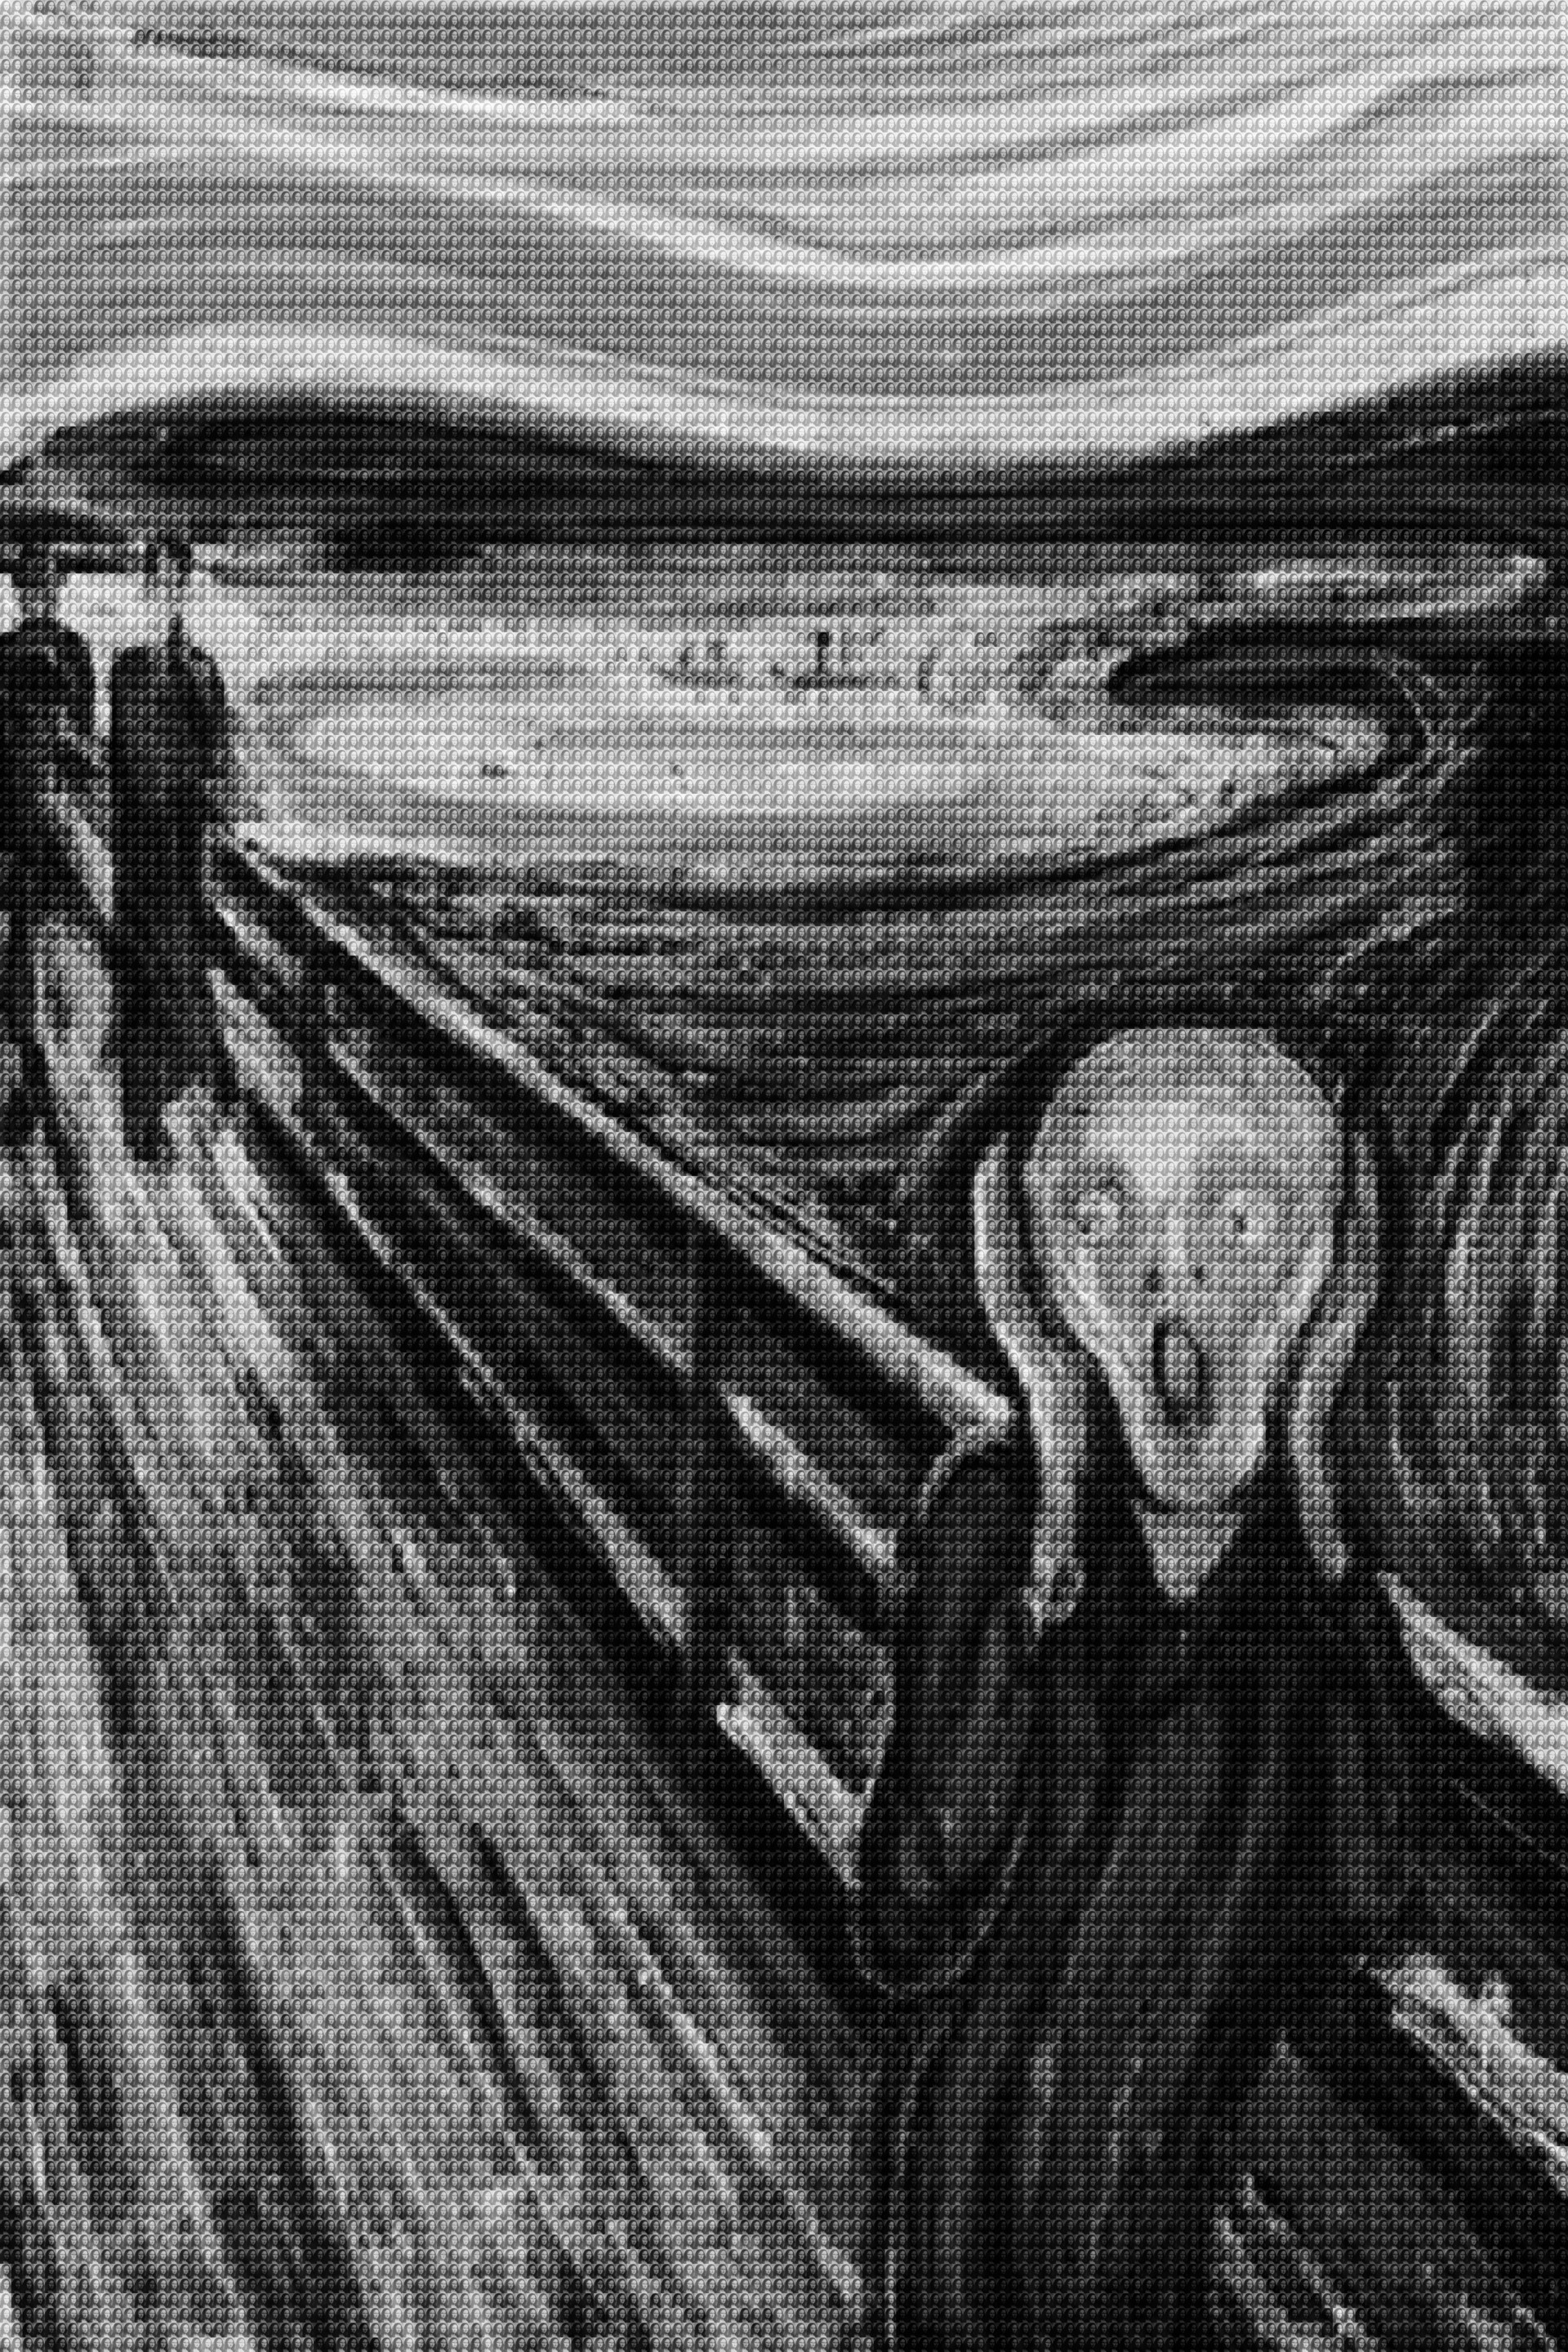 Munch Scream vs Monalisa Smile by Alex Guofeng Cao